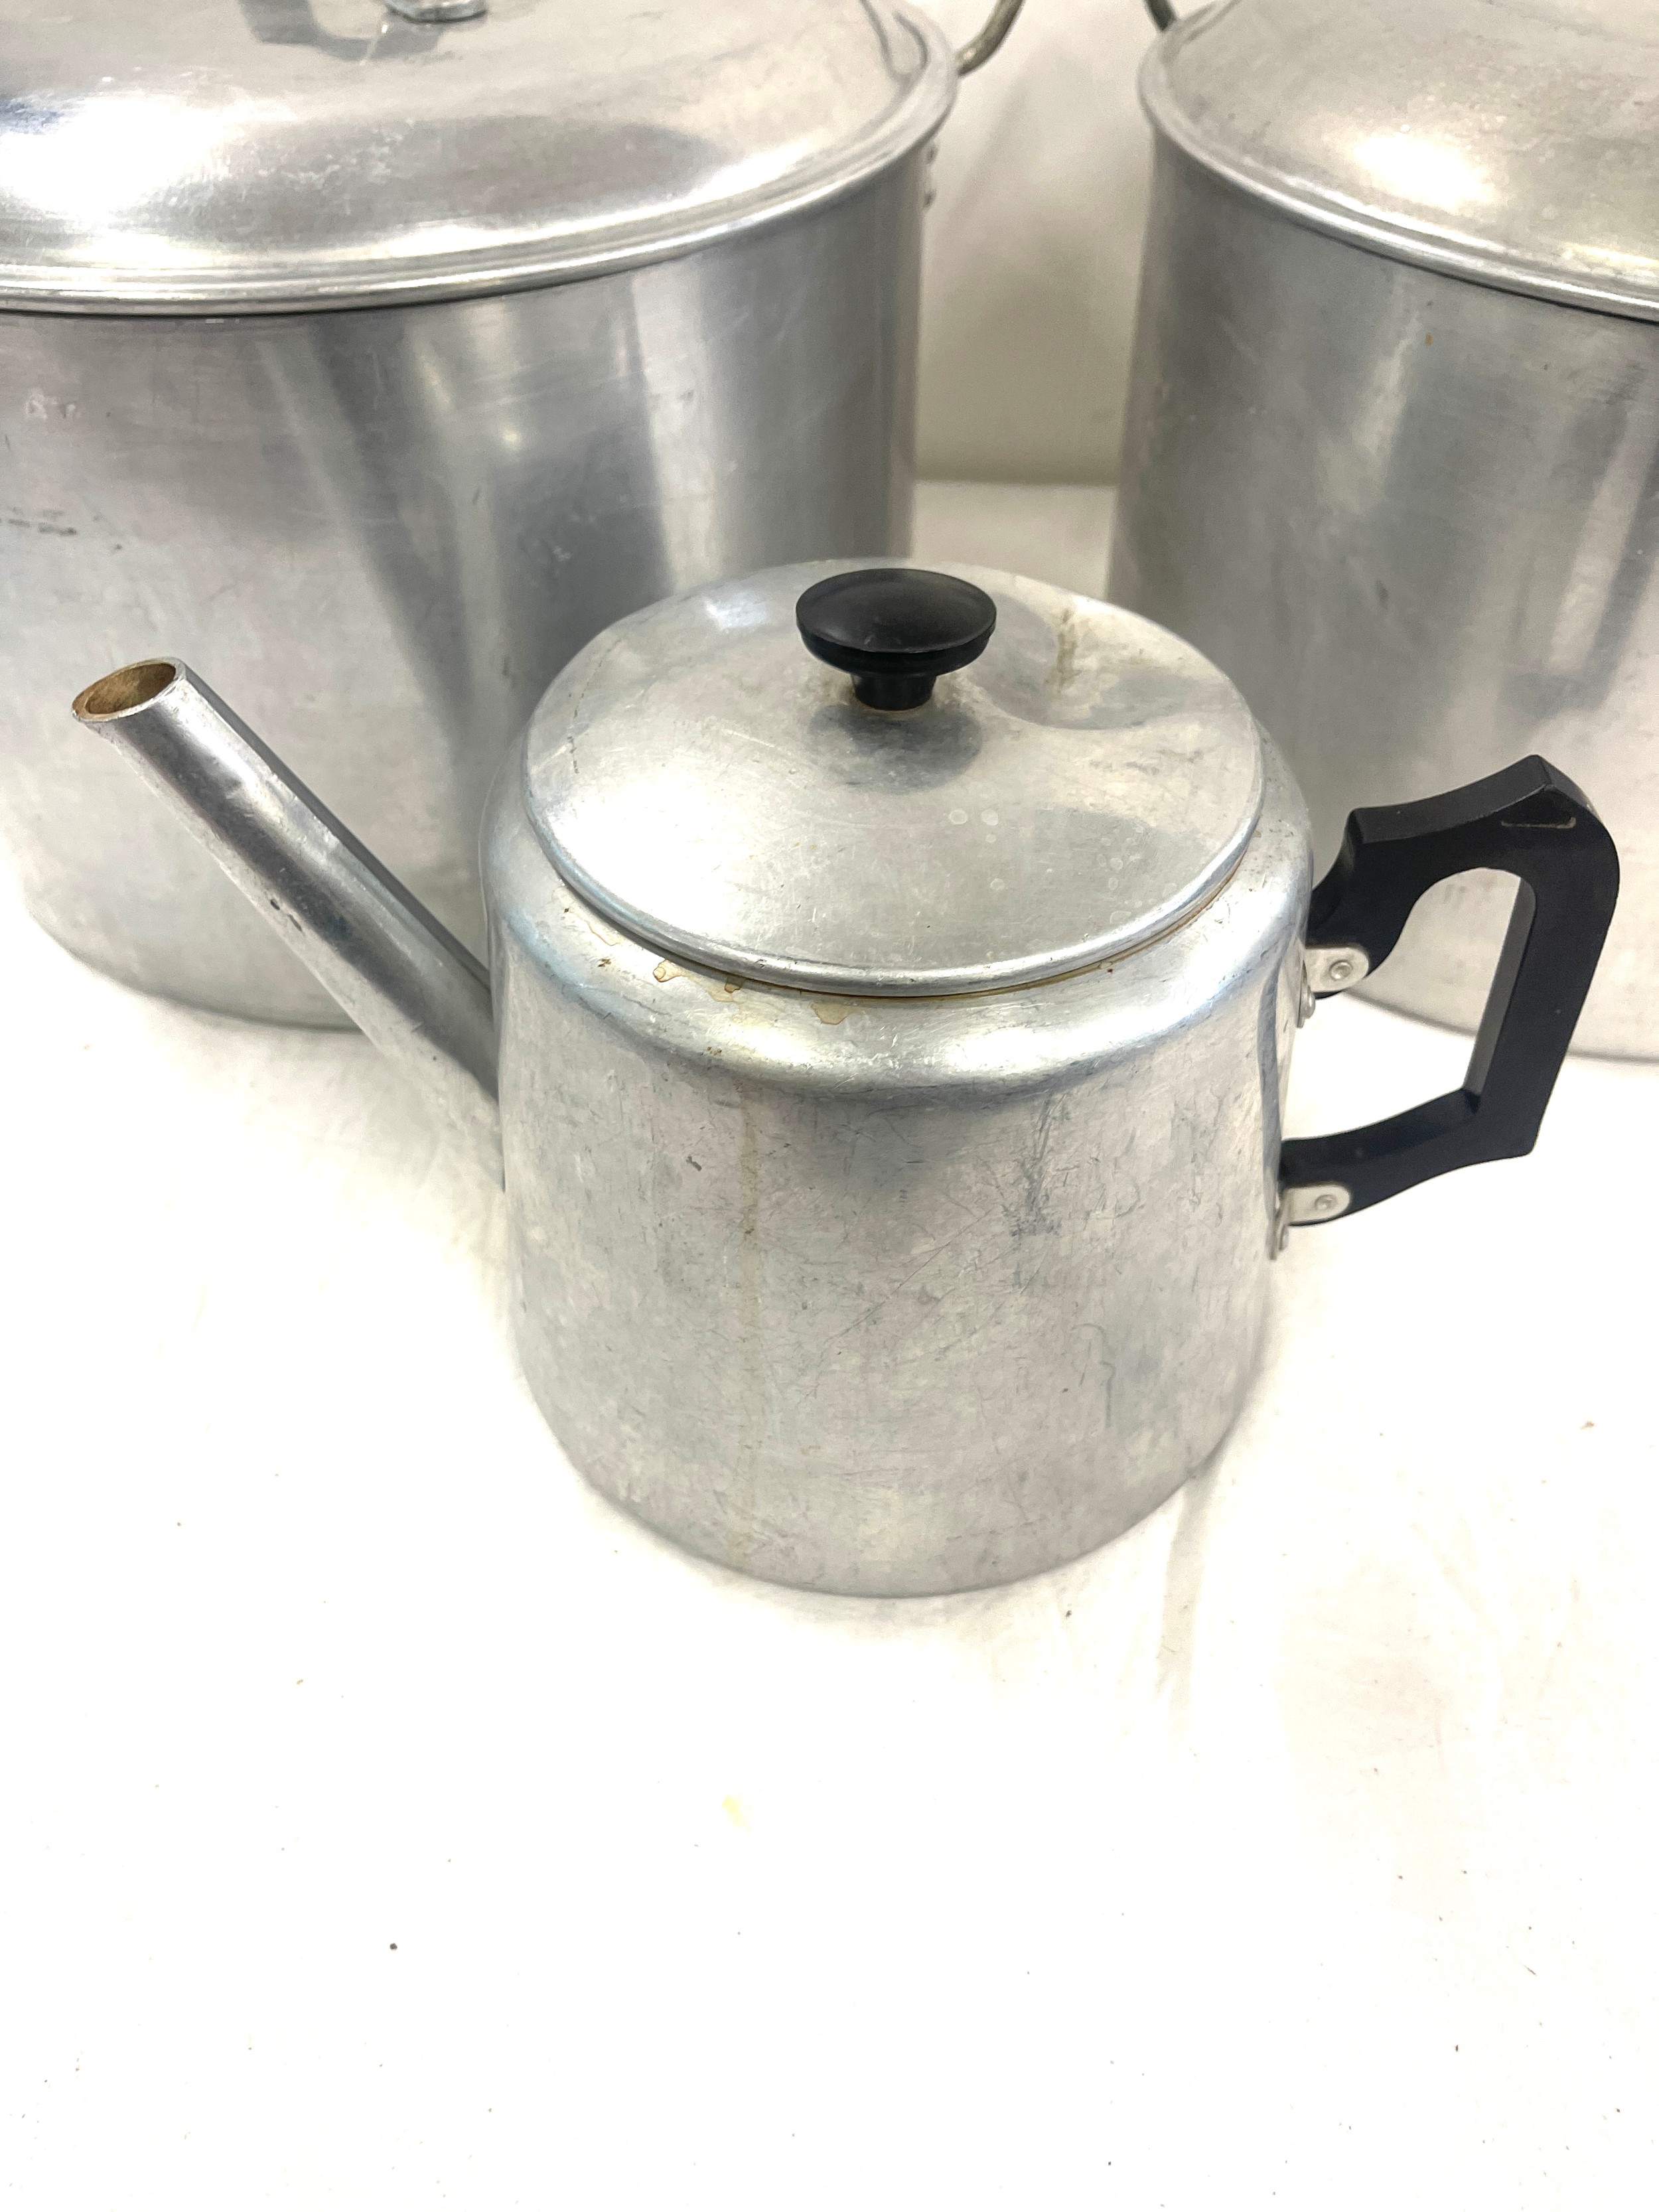 Large stainless steel pans and tea pot, approximate diameter of pans: 12 inches - Image 5 of 5